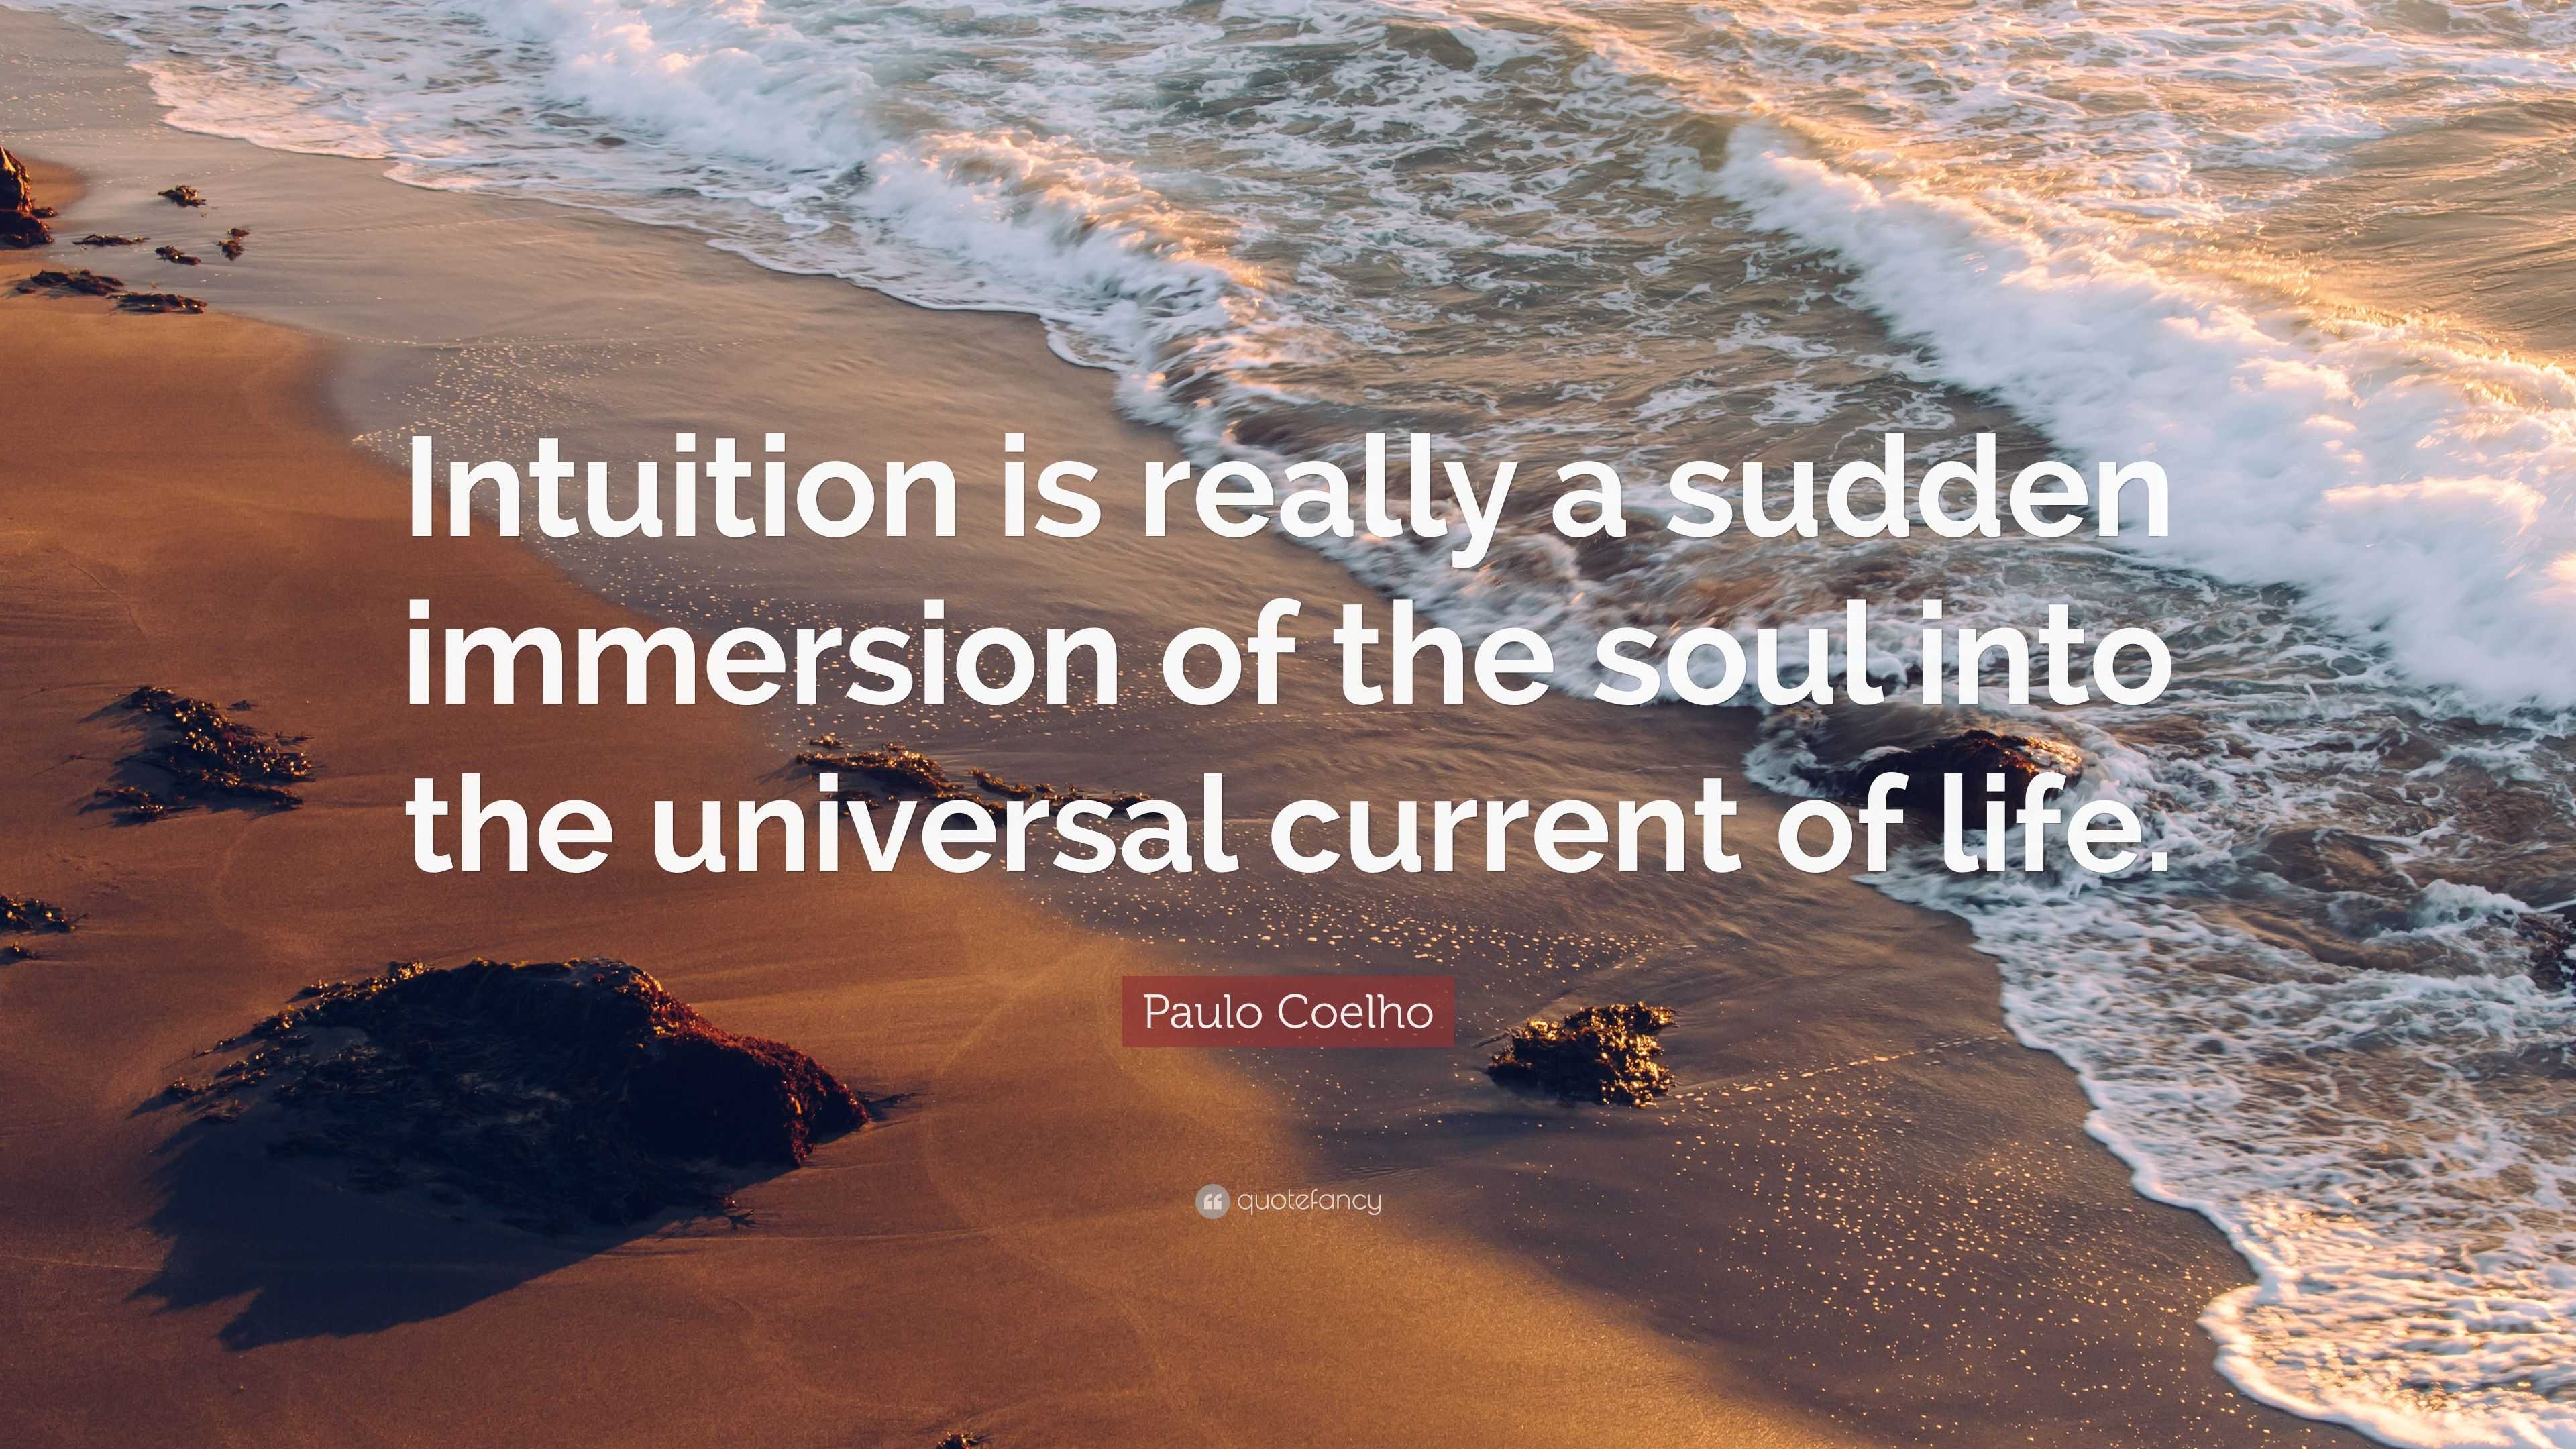 Paulo Coelho Quote: “Intuition is really a sudden immersion of the soul ...